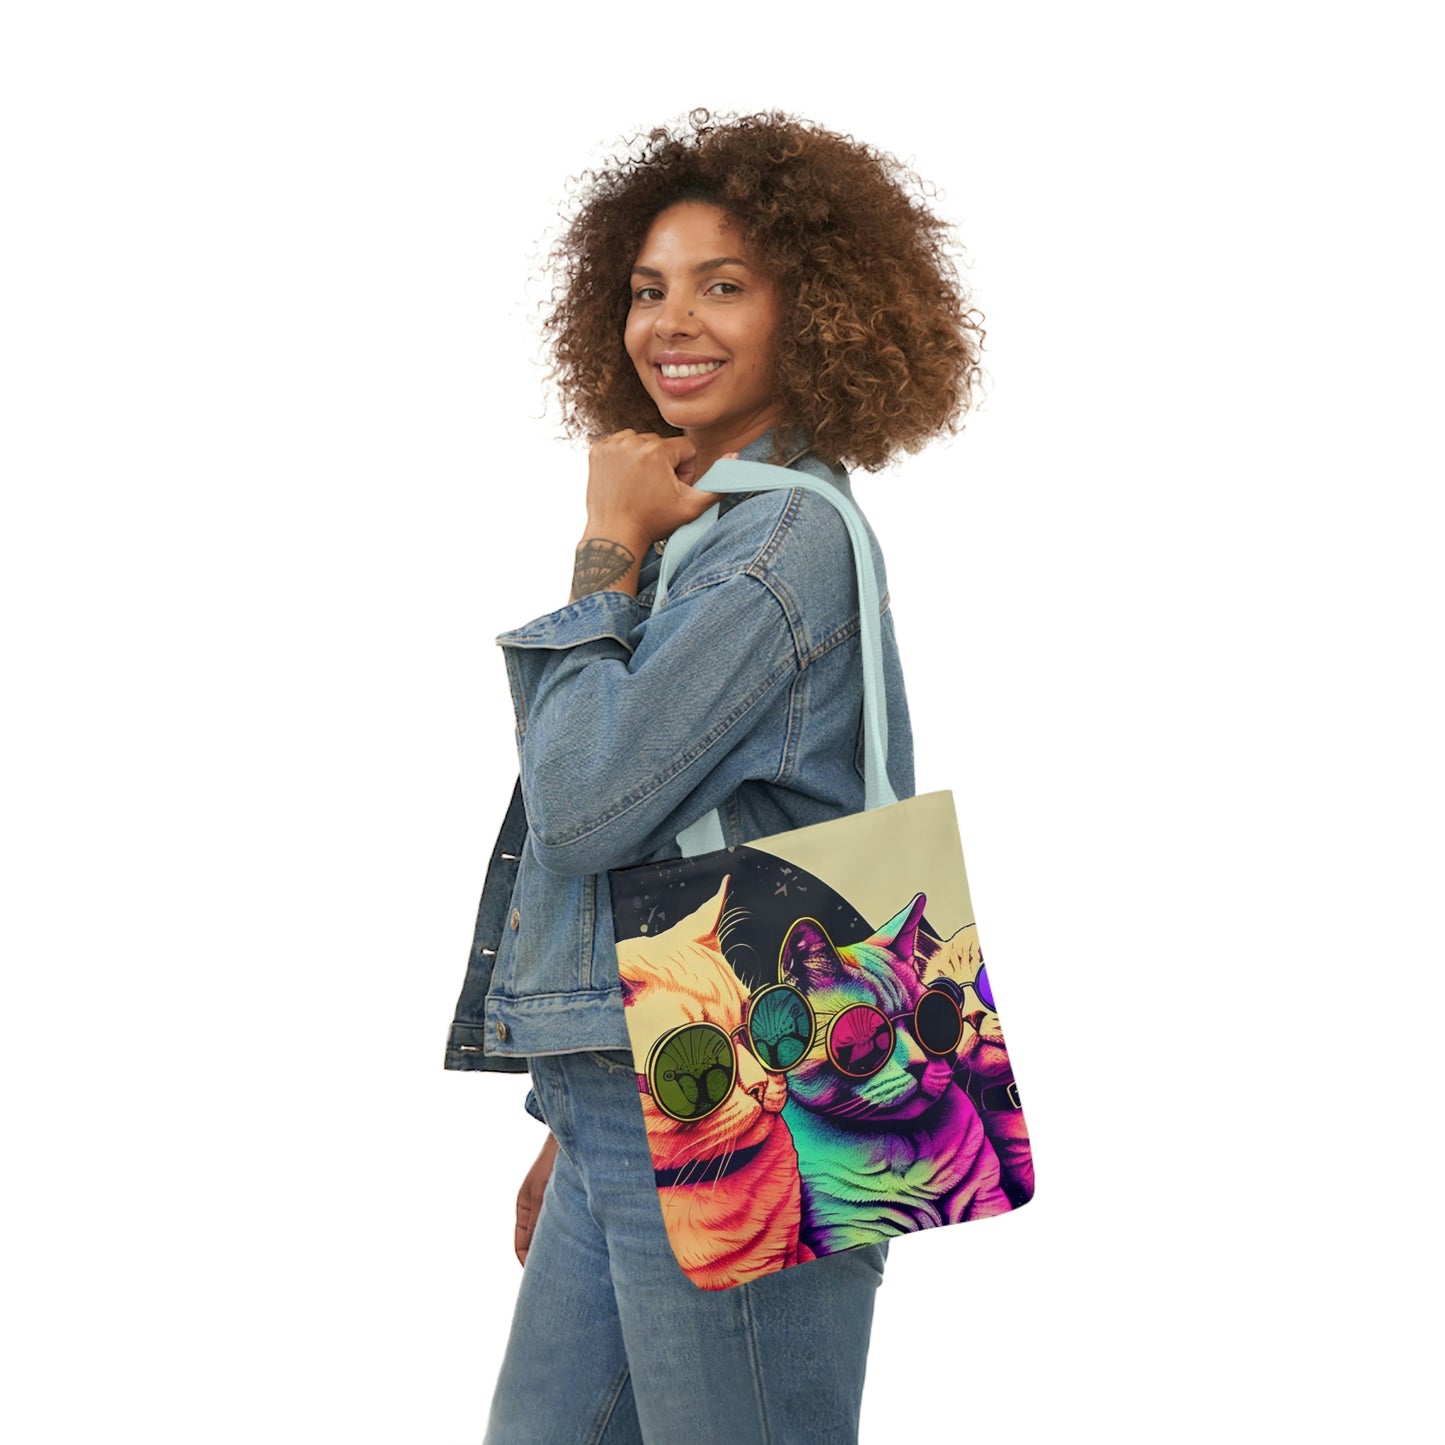 Psychedelic Cats Polyester Canvas Tote Bag